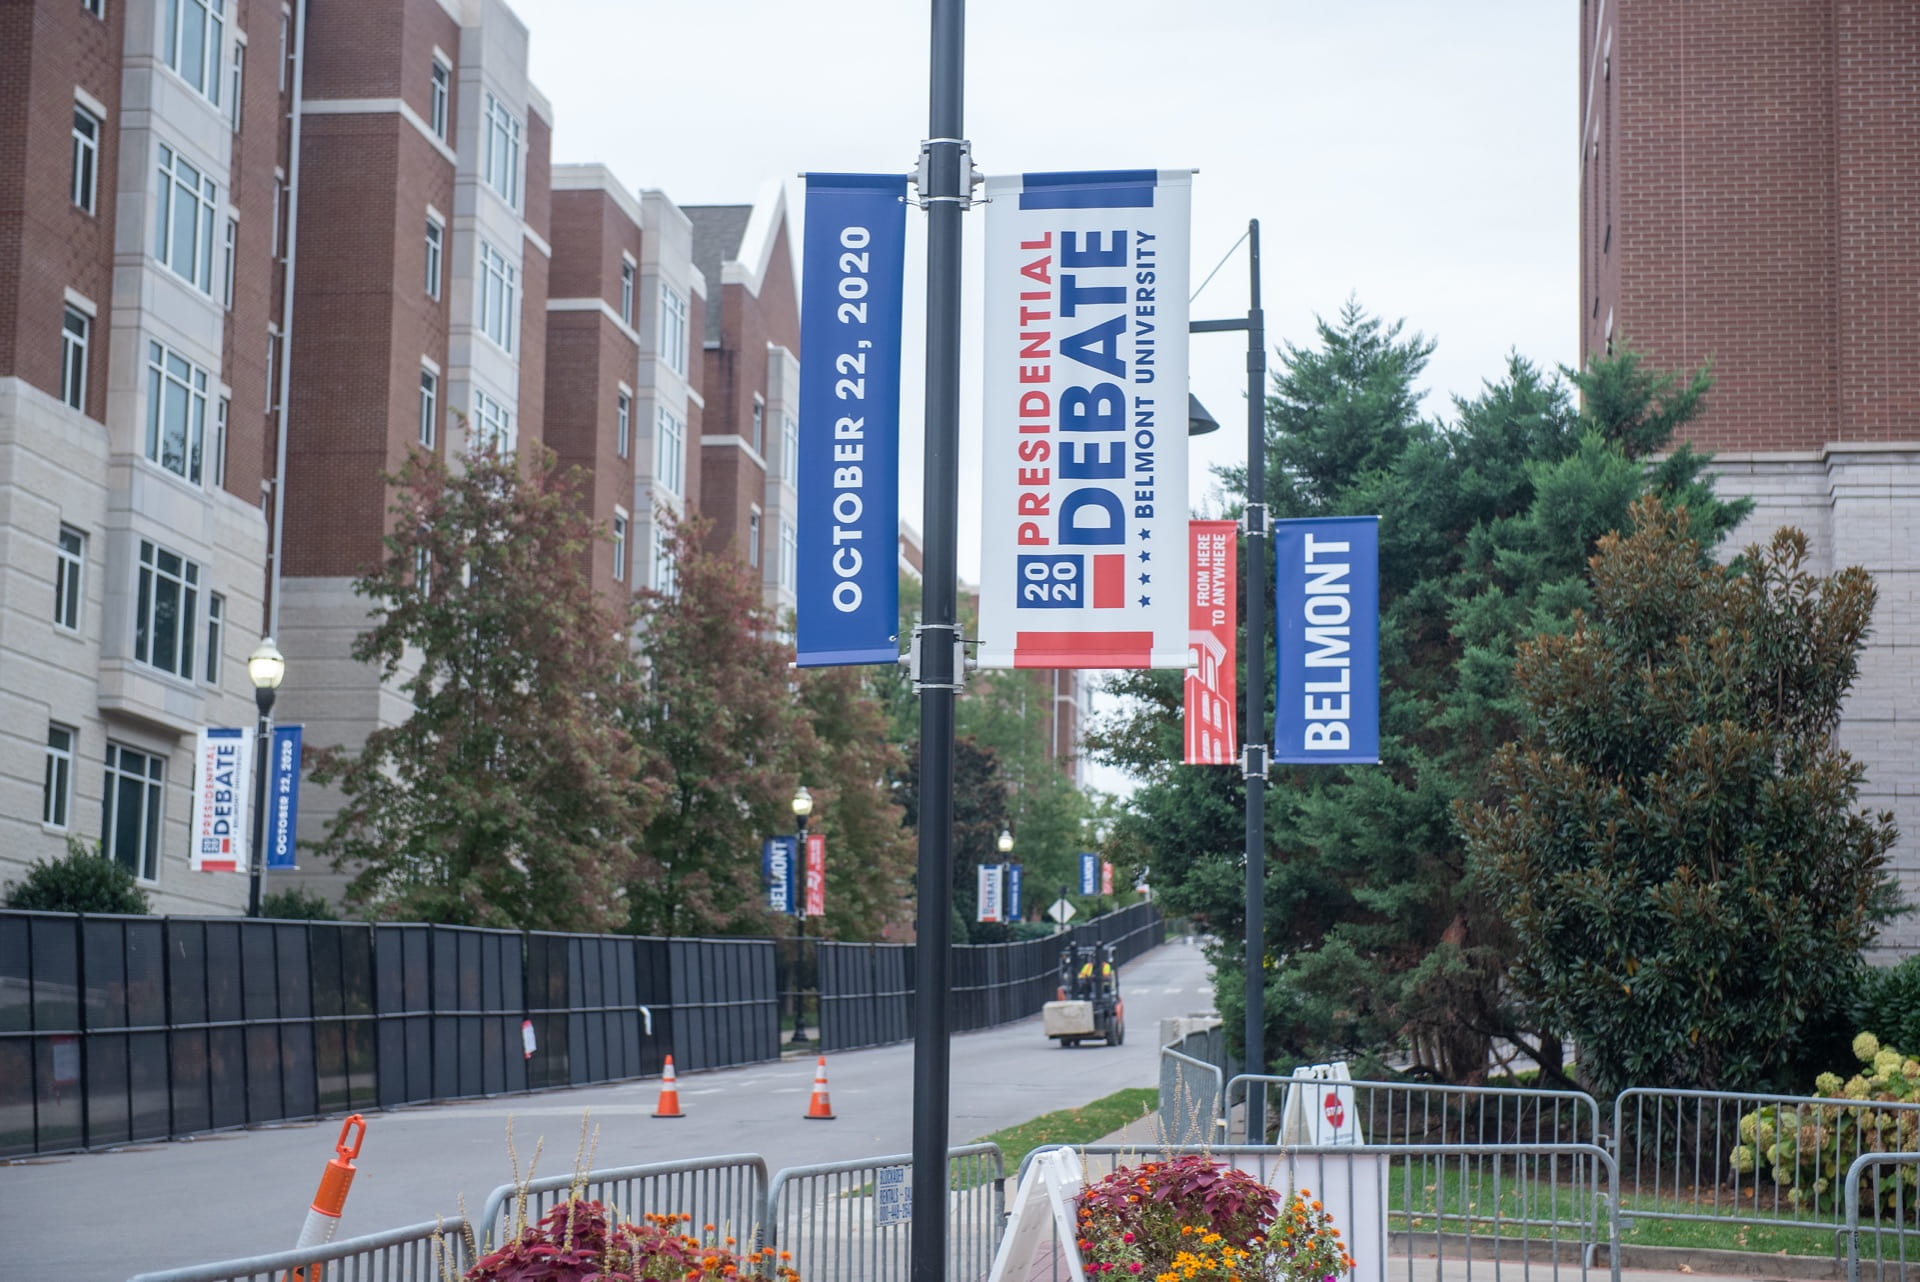 2020 Debate banners and security fencing around the student dorms and the Johnson center